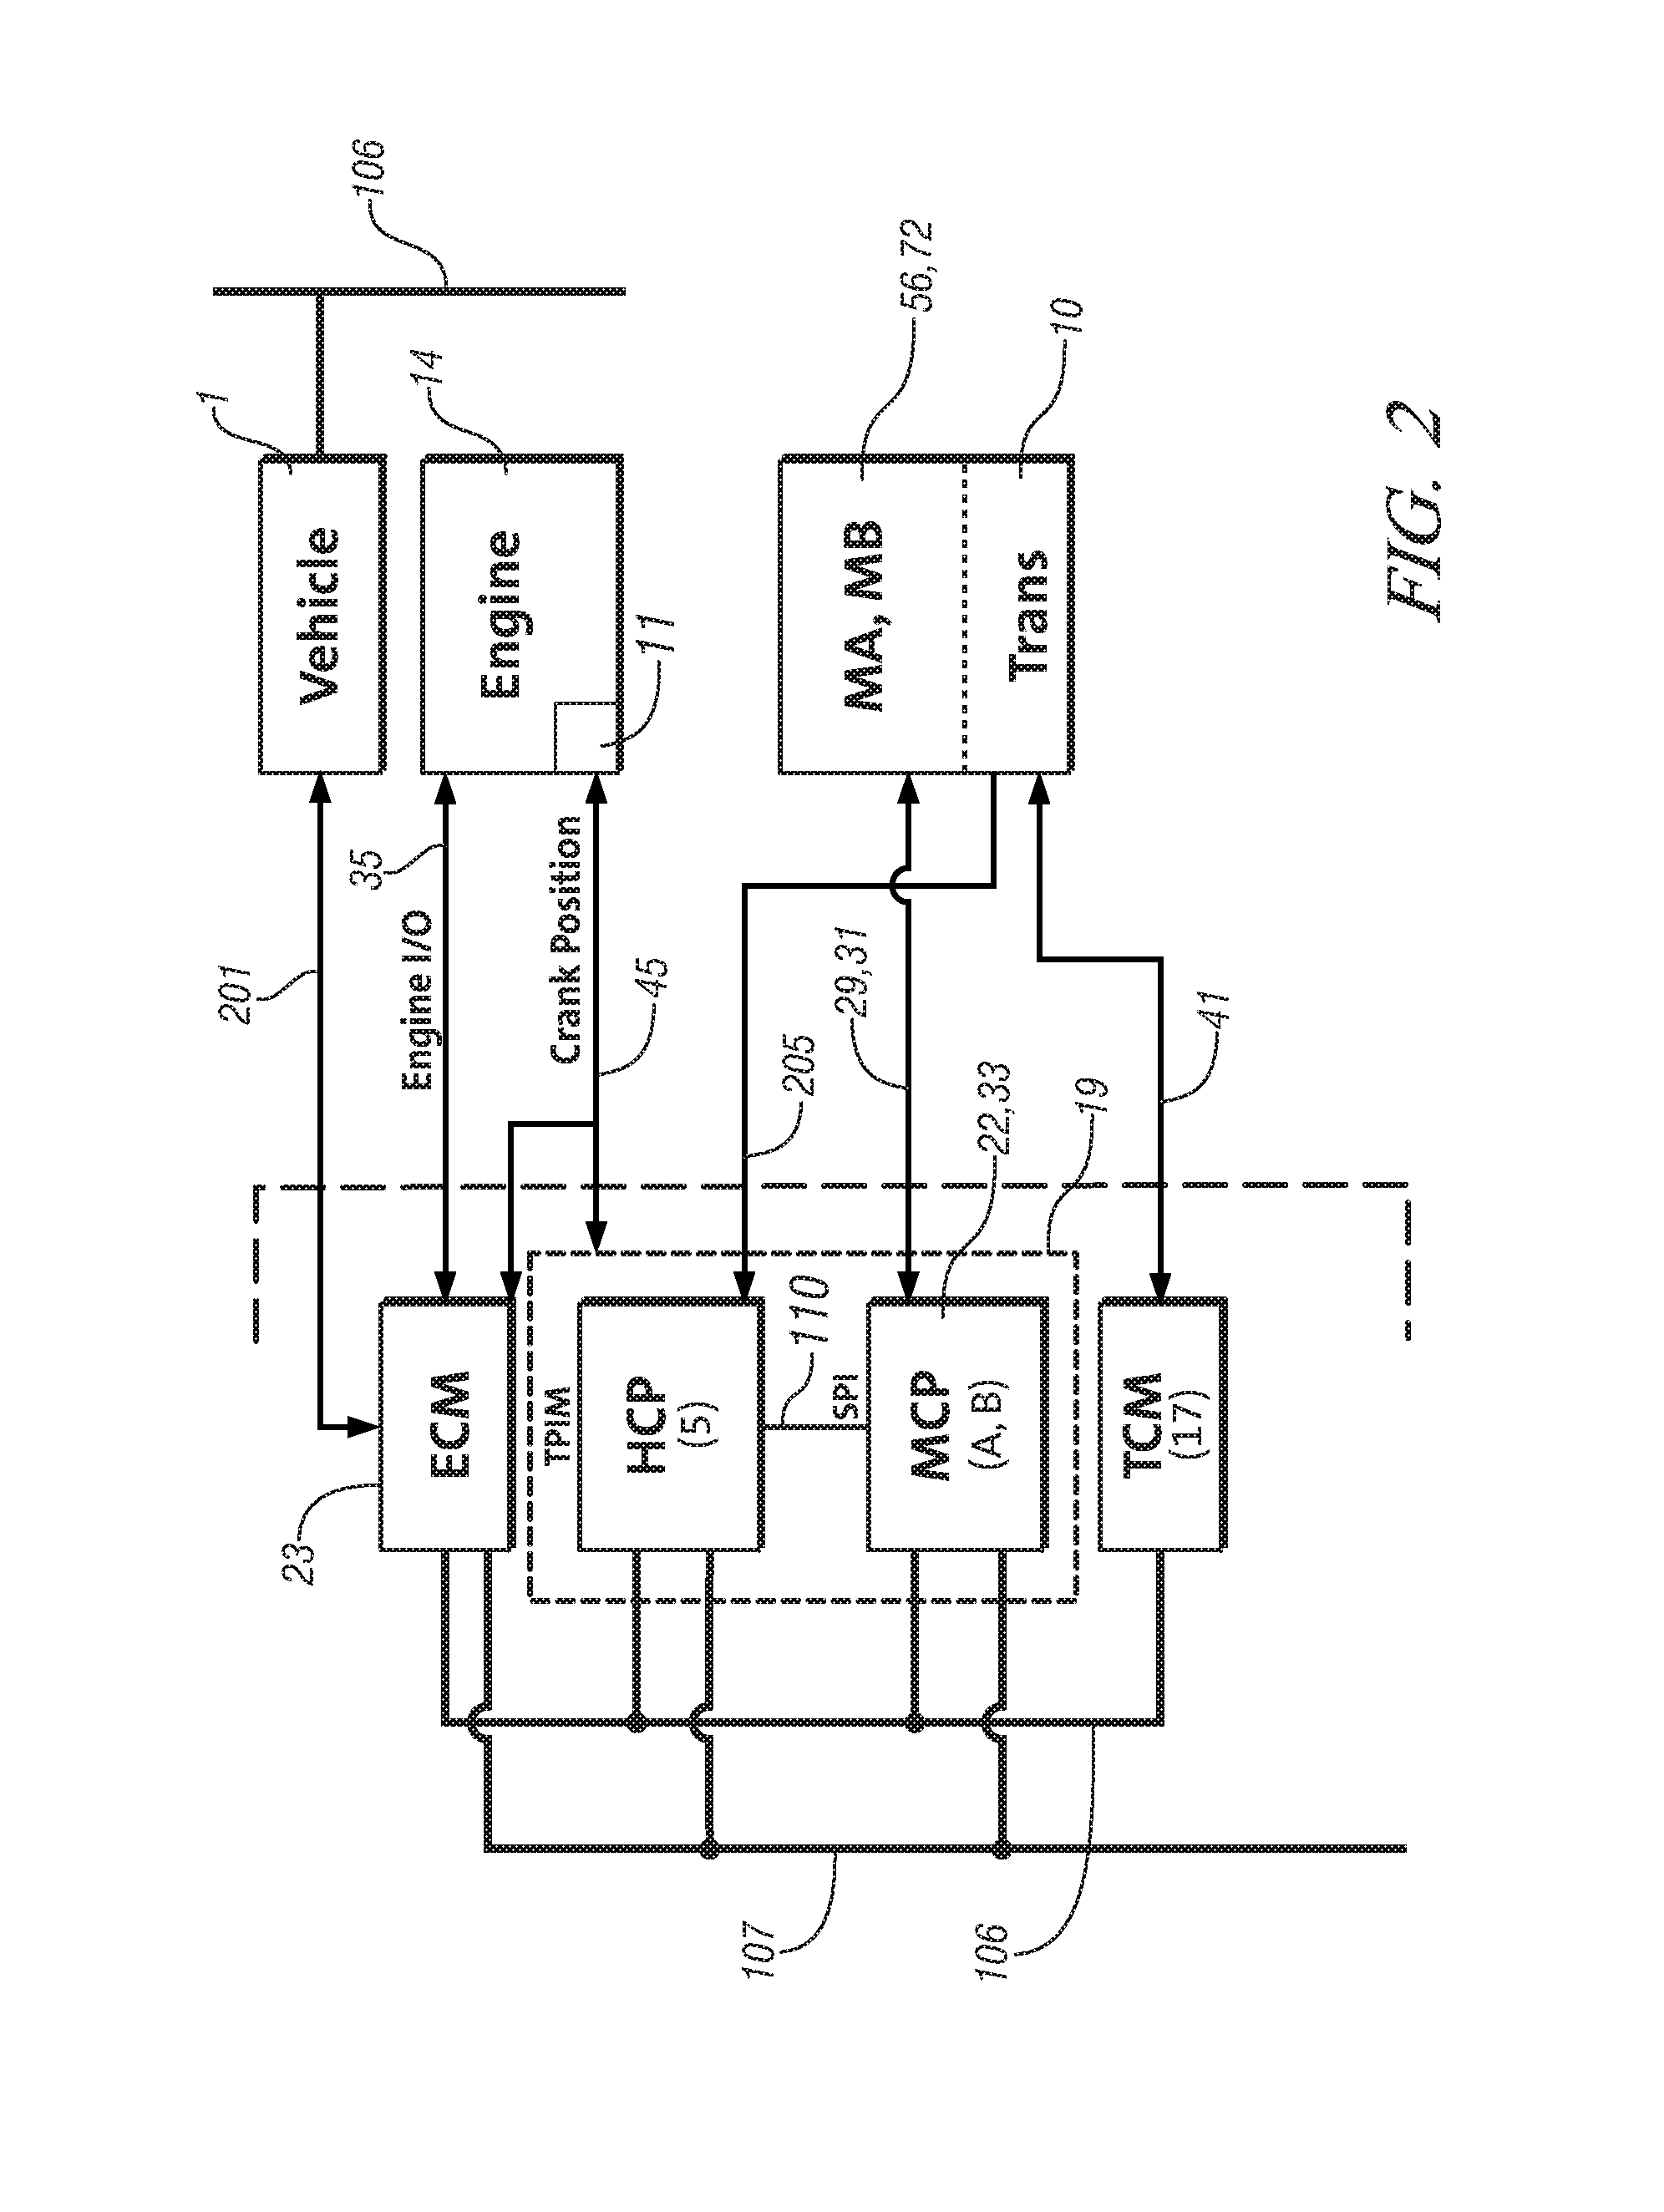 Method and apparatus to determine rotational position of an internal combustion engine